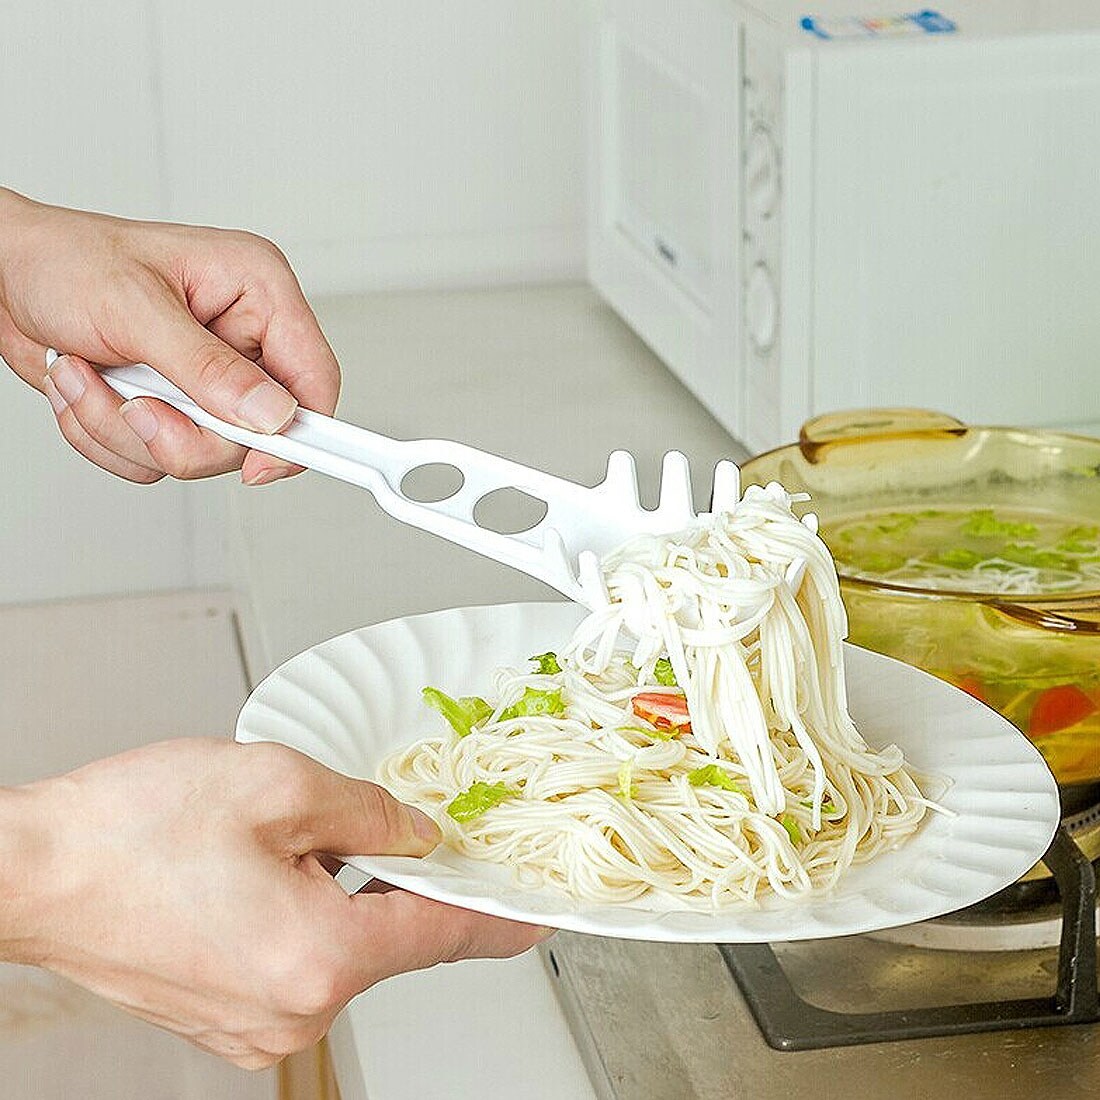 https://ak1.ostkcdn.com/images/products/is/images/direct/7fa4d2b6423e23f0264388fc569053b0336da509/Home-Restaurant-Kitchen-Plastic-Noodle-Spaghetti-Spoon-Fork-Scoop-Ladle-White.jpg